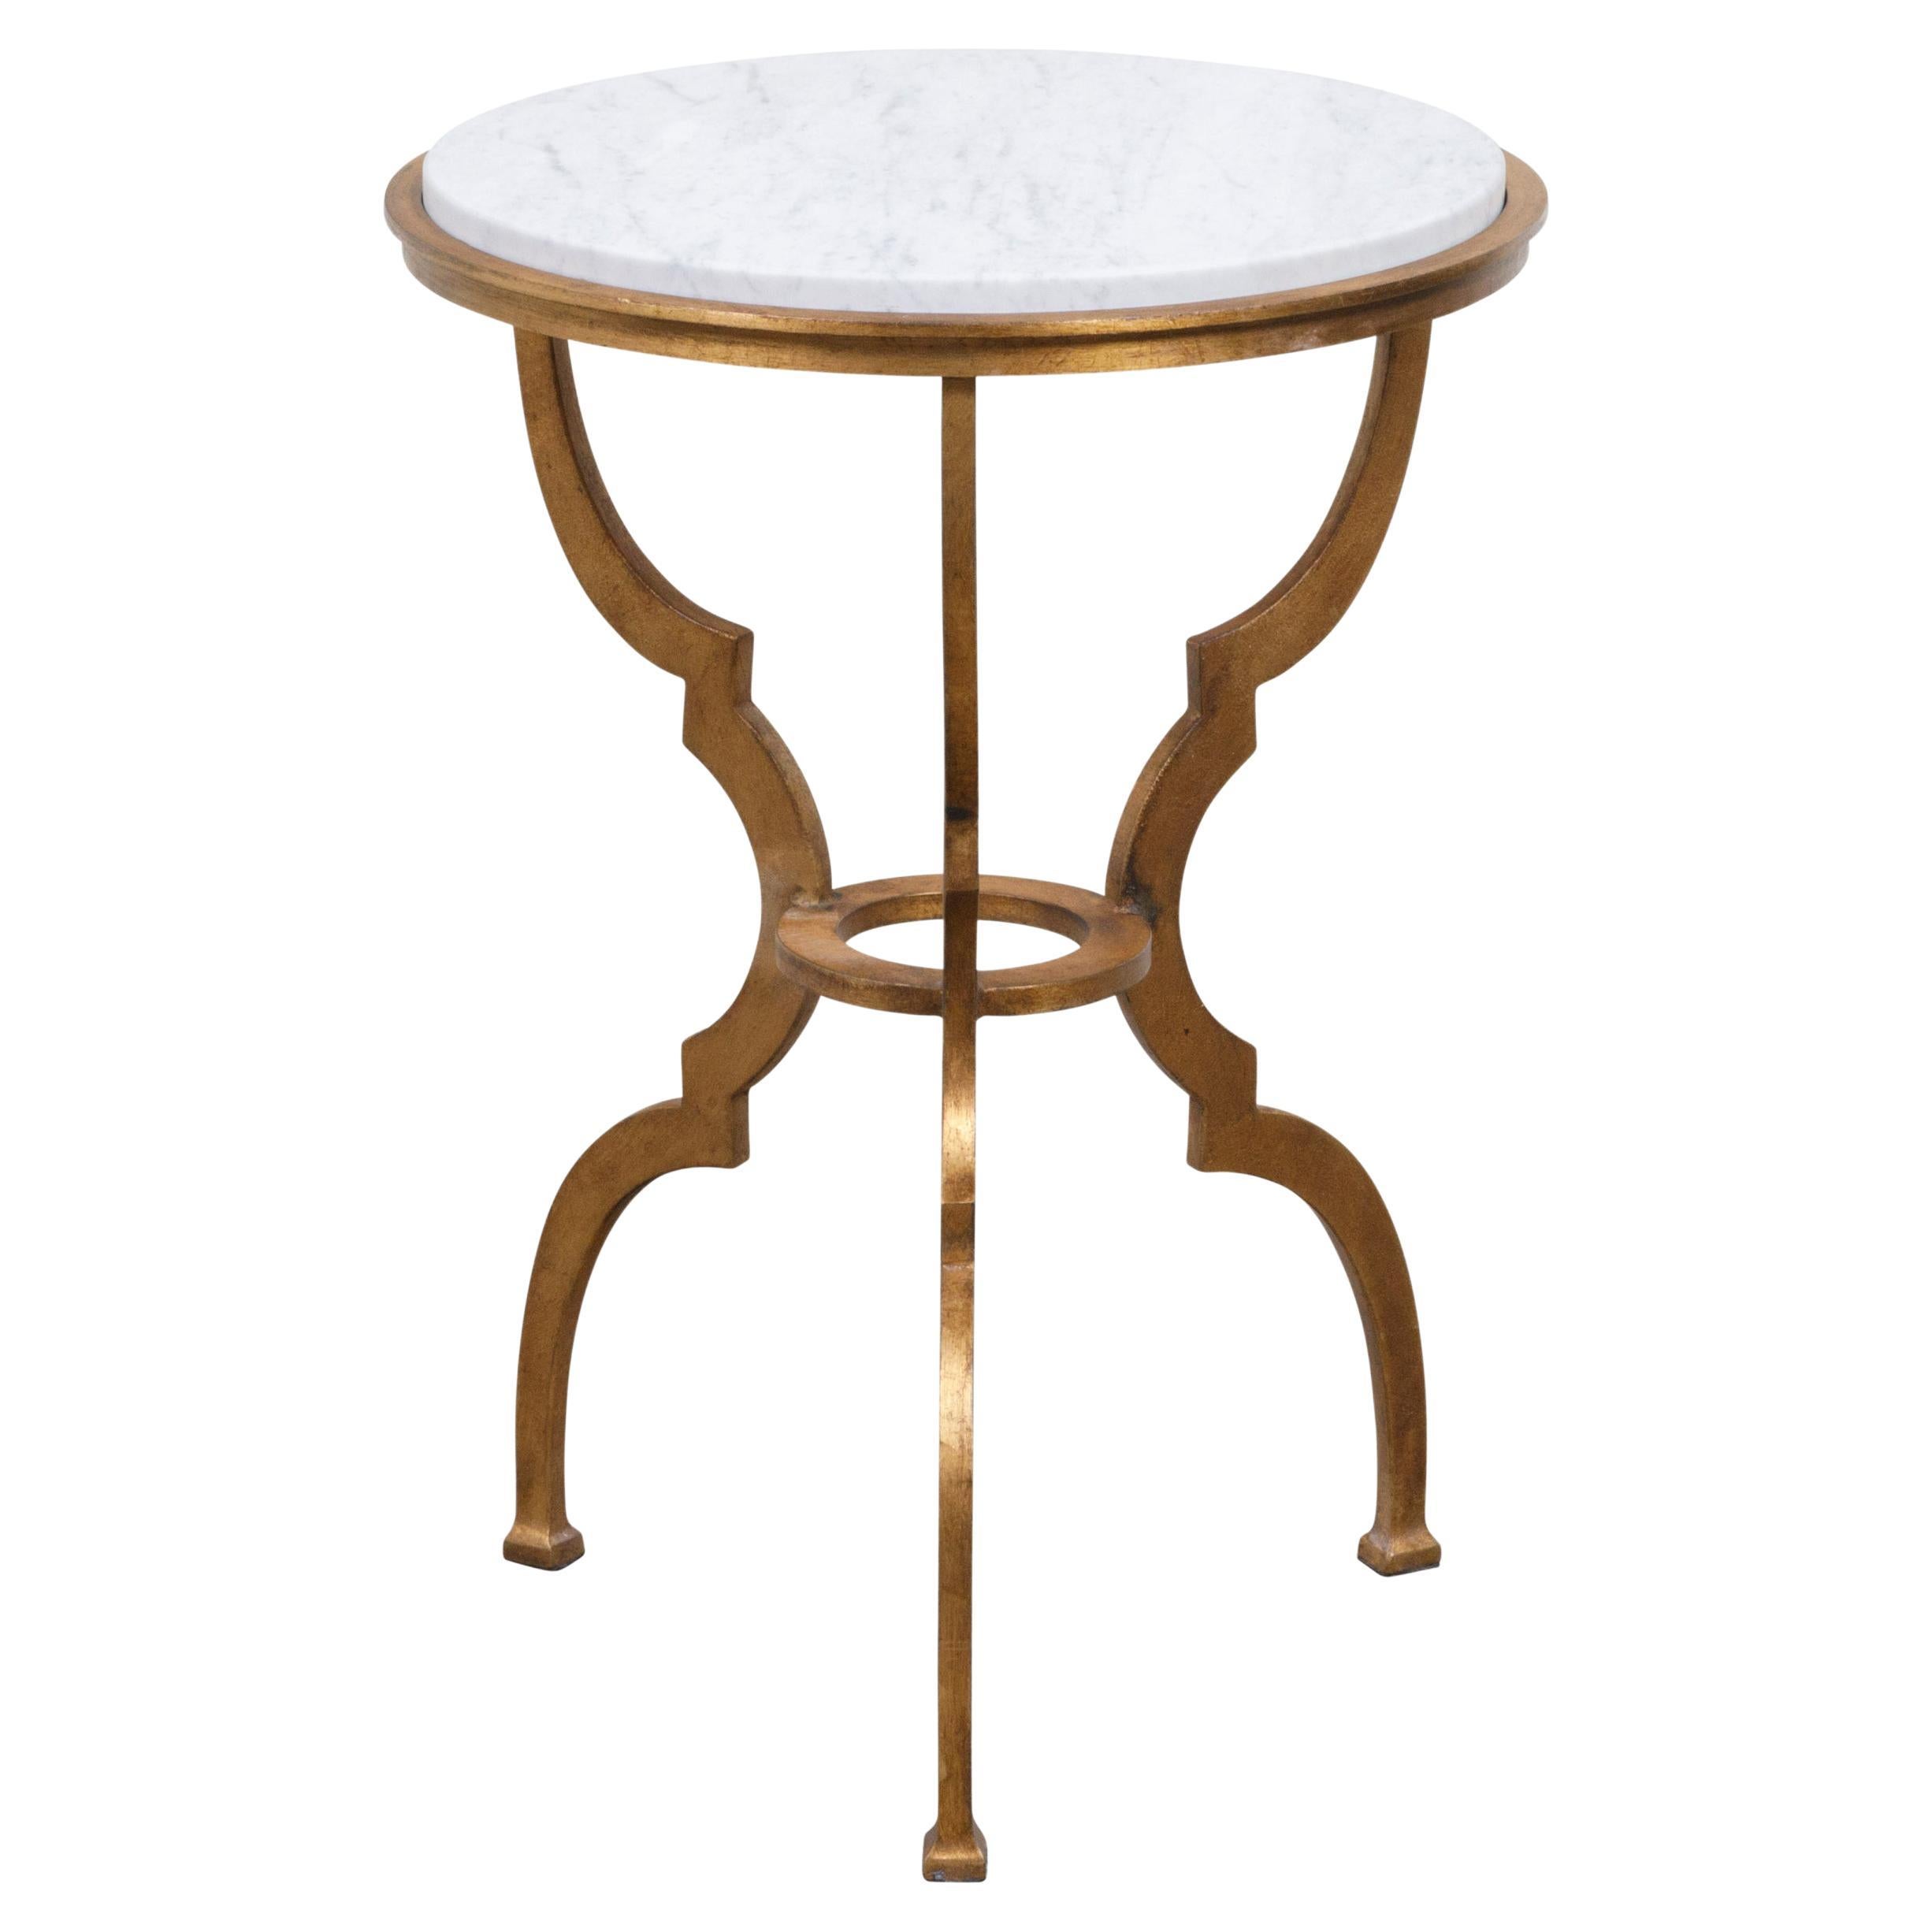 Italian Midcentury Gilt Metal Side Table with Marble Top and Scrolling Legs For Sale